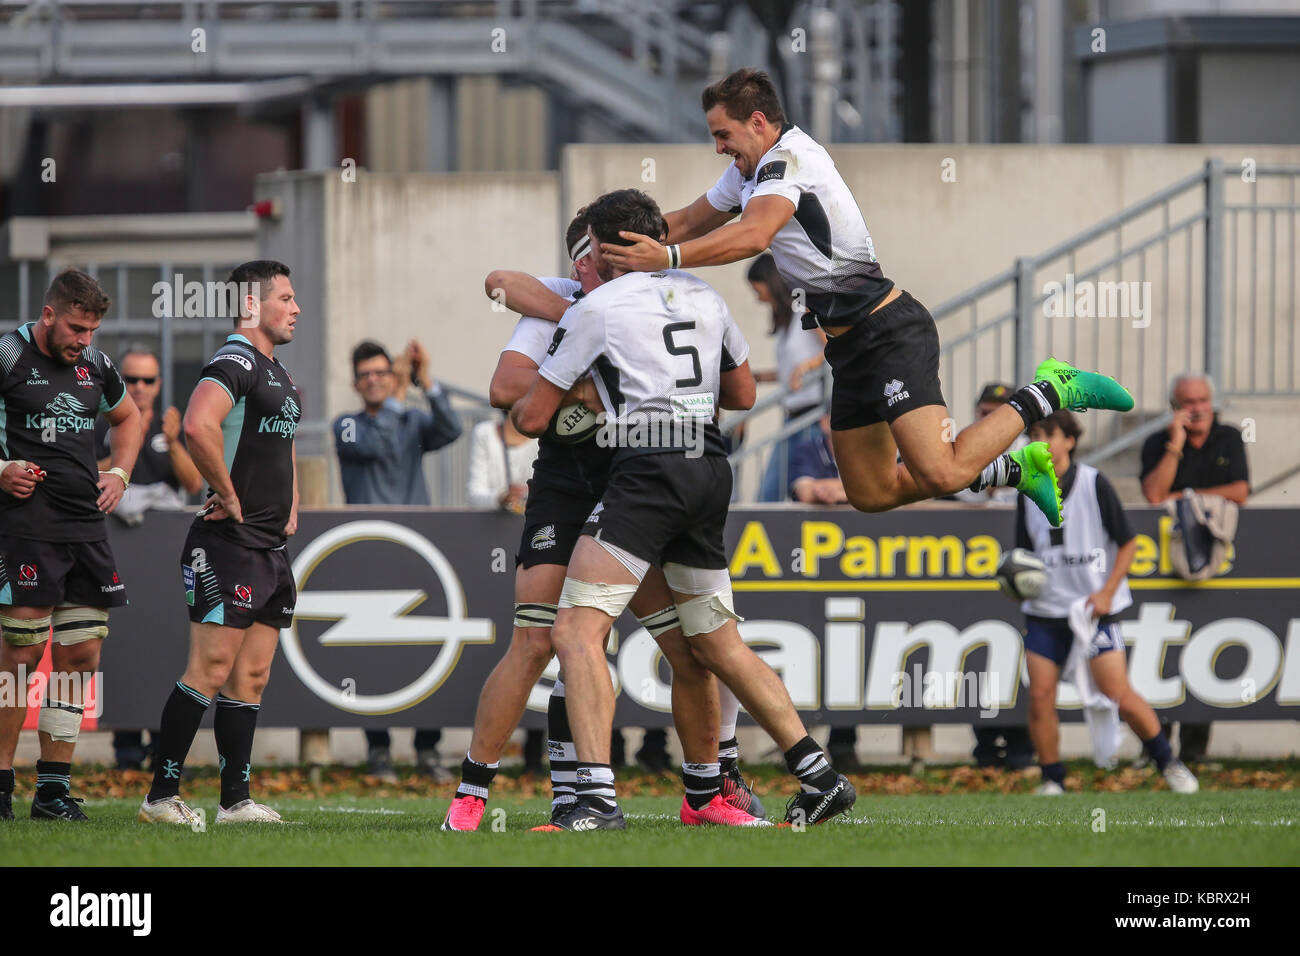 Parma, Italy. 30th September 2017. Zebre's players celebration after the winning try in the match against Ulster in Guinness PRO14 rugby championship. Massimiliano Carnabuci/Alamy Live News Stock Photo